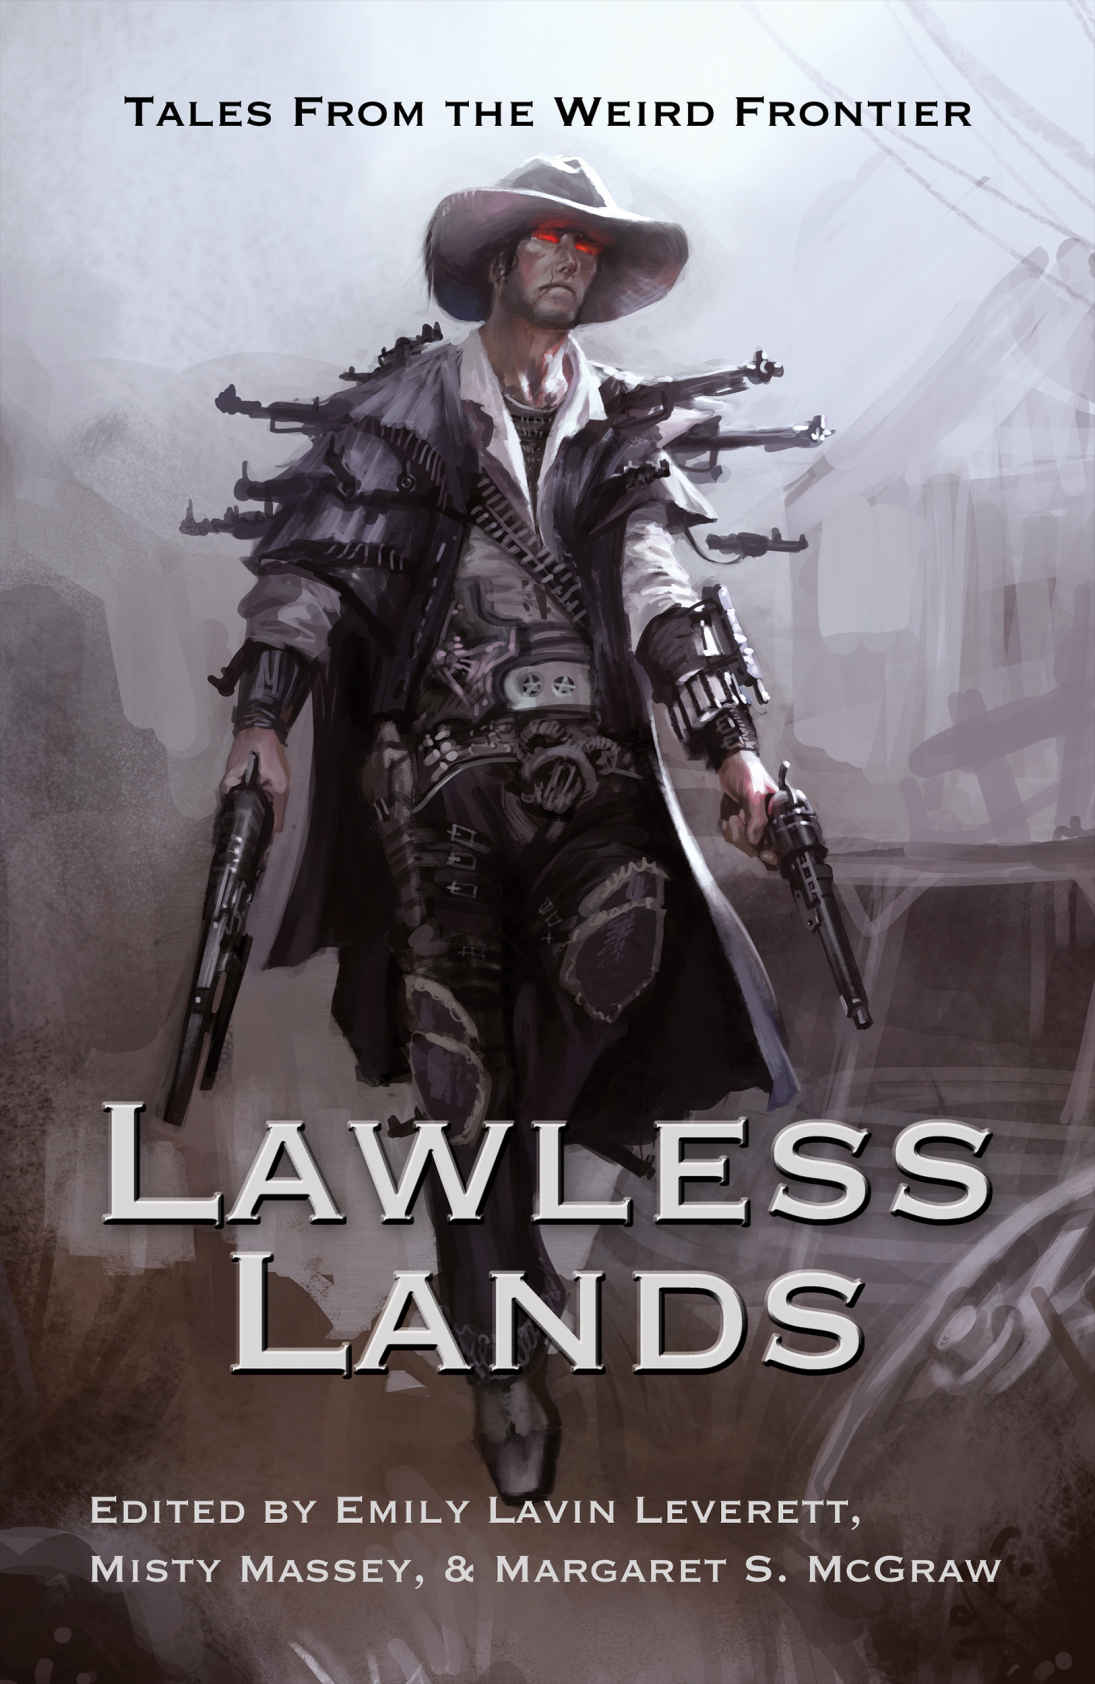 Lawless Lands: Tales From the Weird Frontier